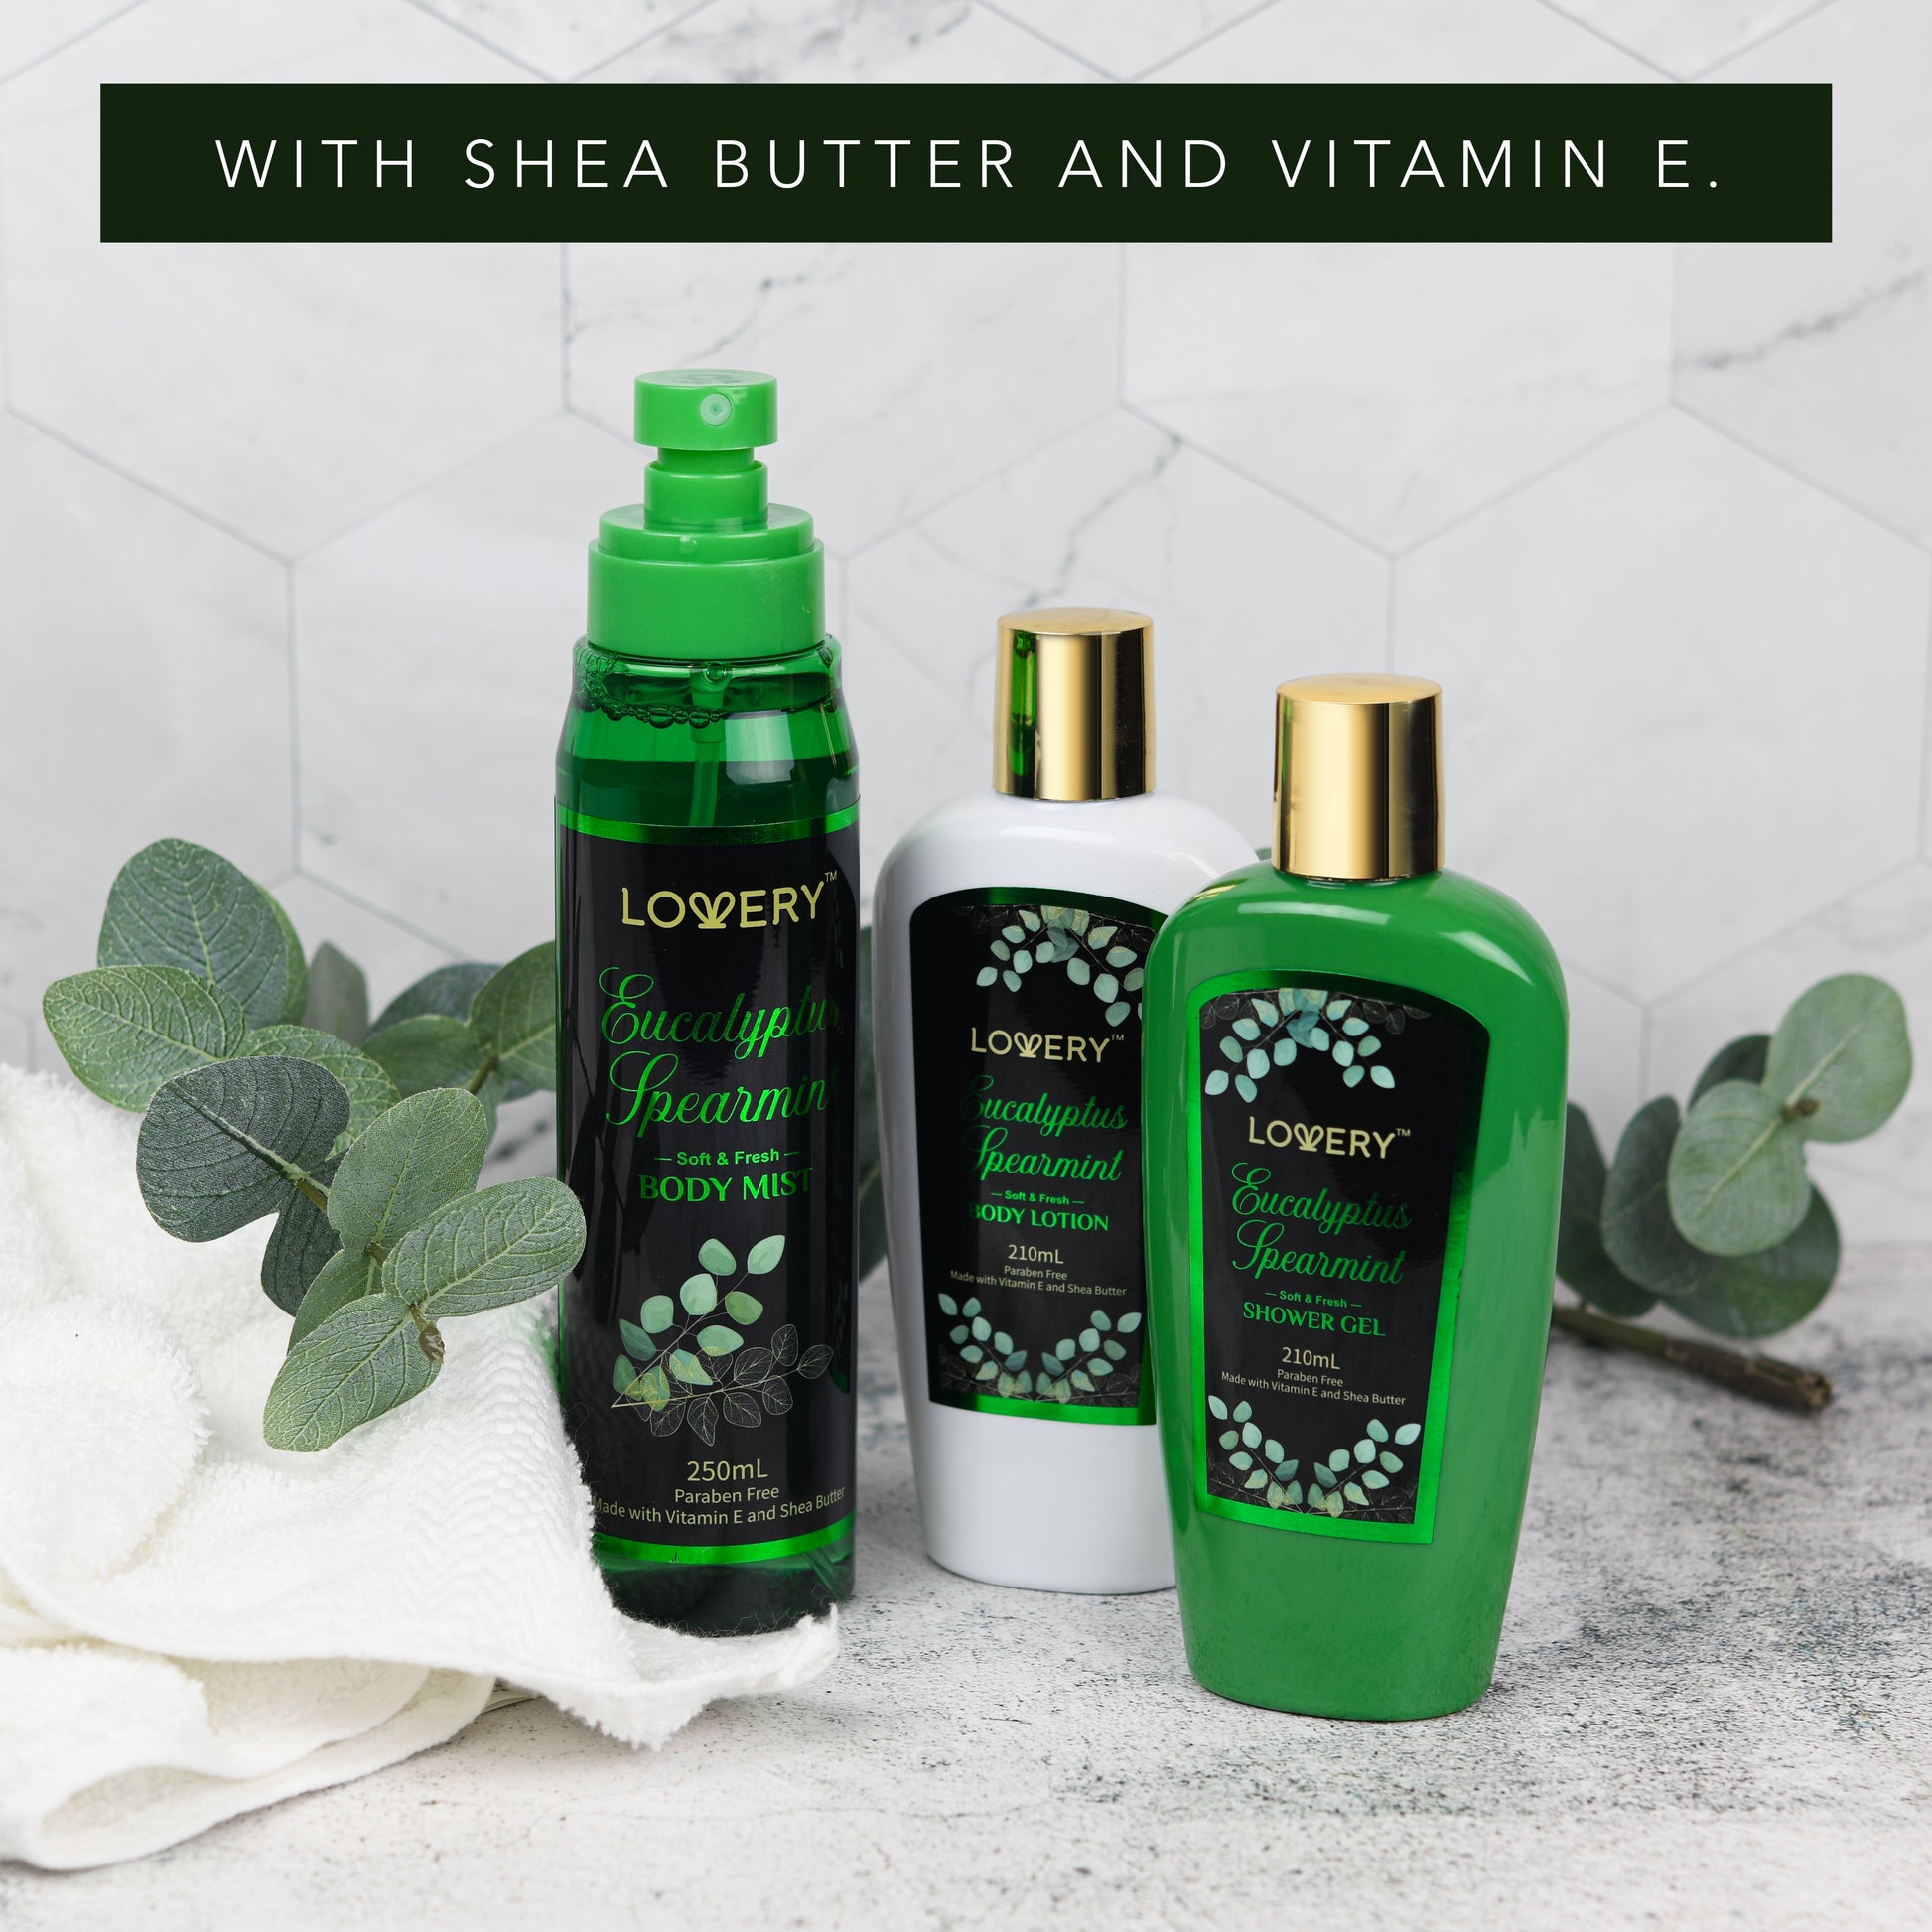 lovery eucalyptus bath, eucalyptus bath, Eucalyptus Bath Kit, Travel Set, All-in-One Beauty Kit, Spa Essentials, Eucalyptus Spearmint bath kit, Bath and Body Cosmetics, All Natural, Vitamin E, Shea Butter, Self-Care Package, Luxurious Scent, Hydrating Skin Care, Gift Bath Set, Elegant Packaging, Perfect Gift, Relaxing Spa Set